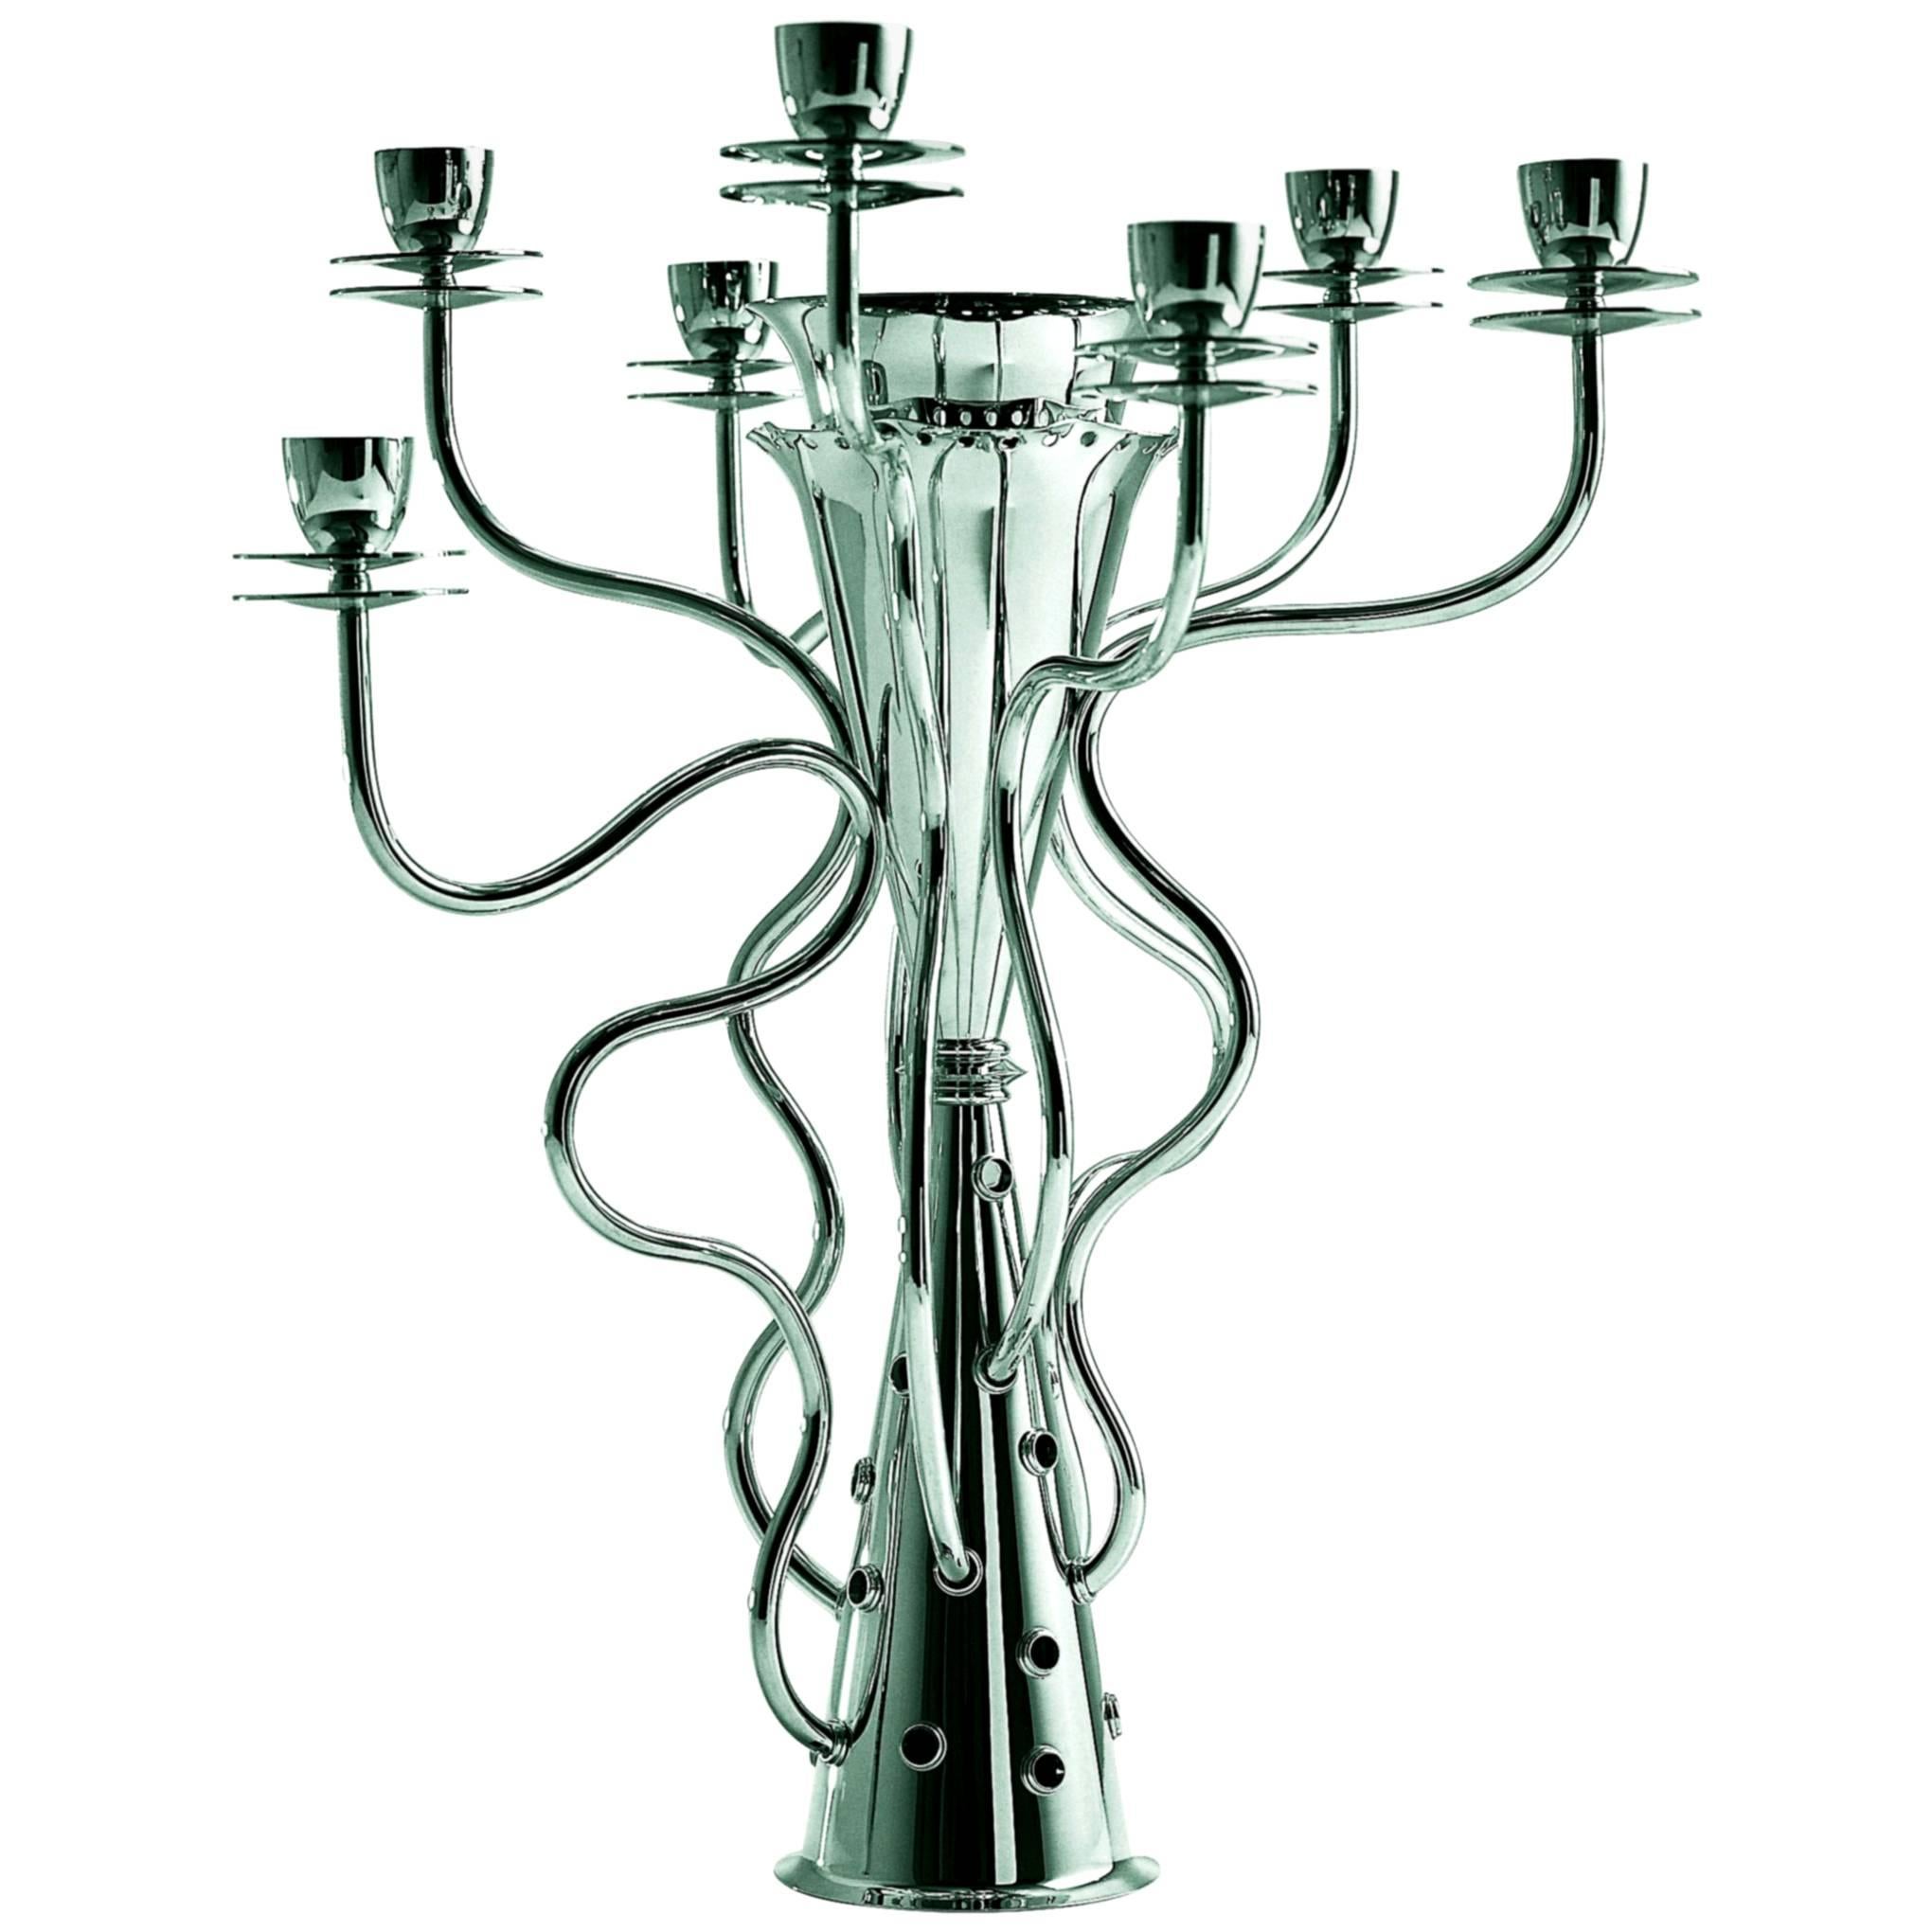 Simon Large Silver Plated Seven-Branched Candleholder by Borek Sipek for Driade